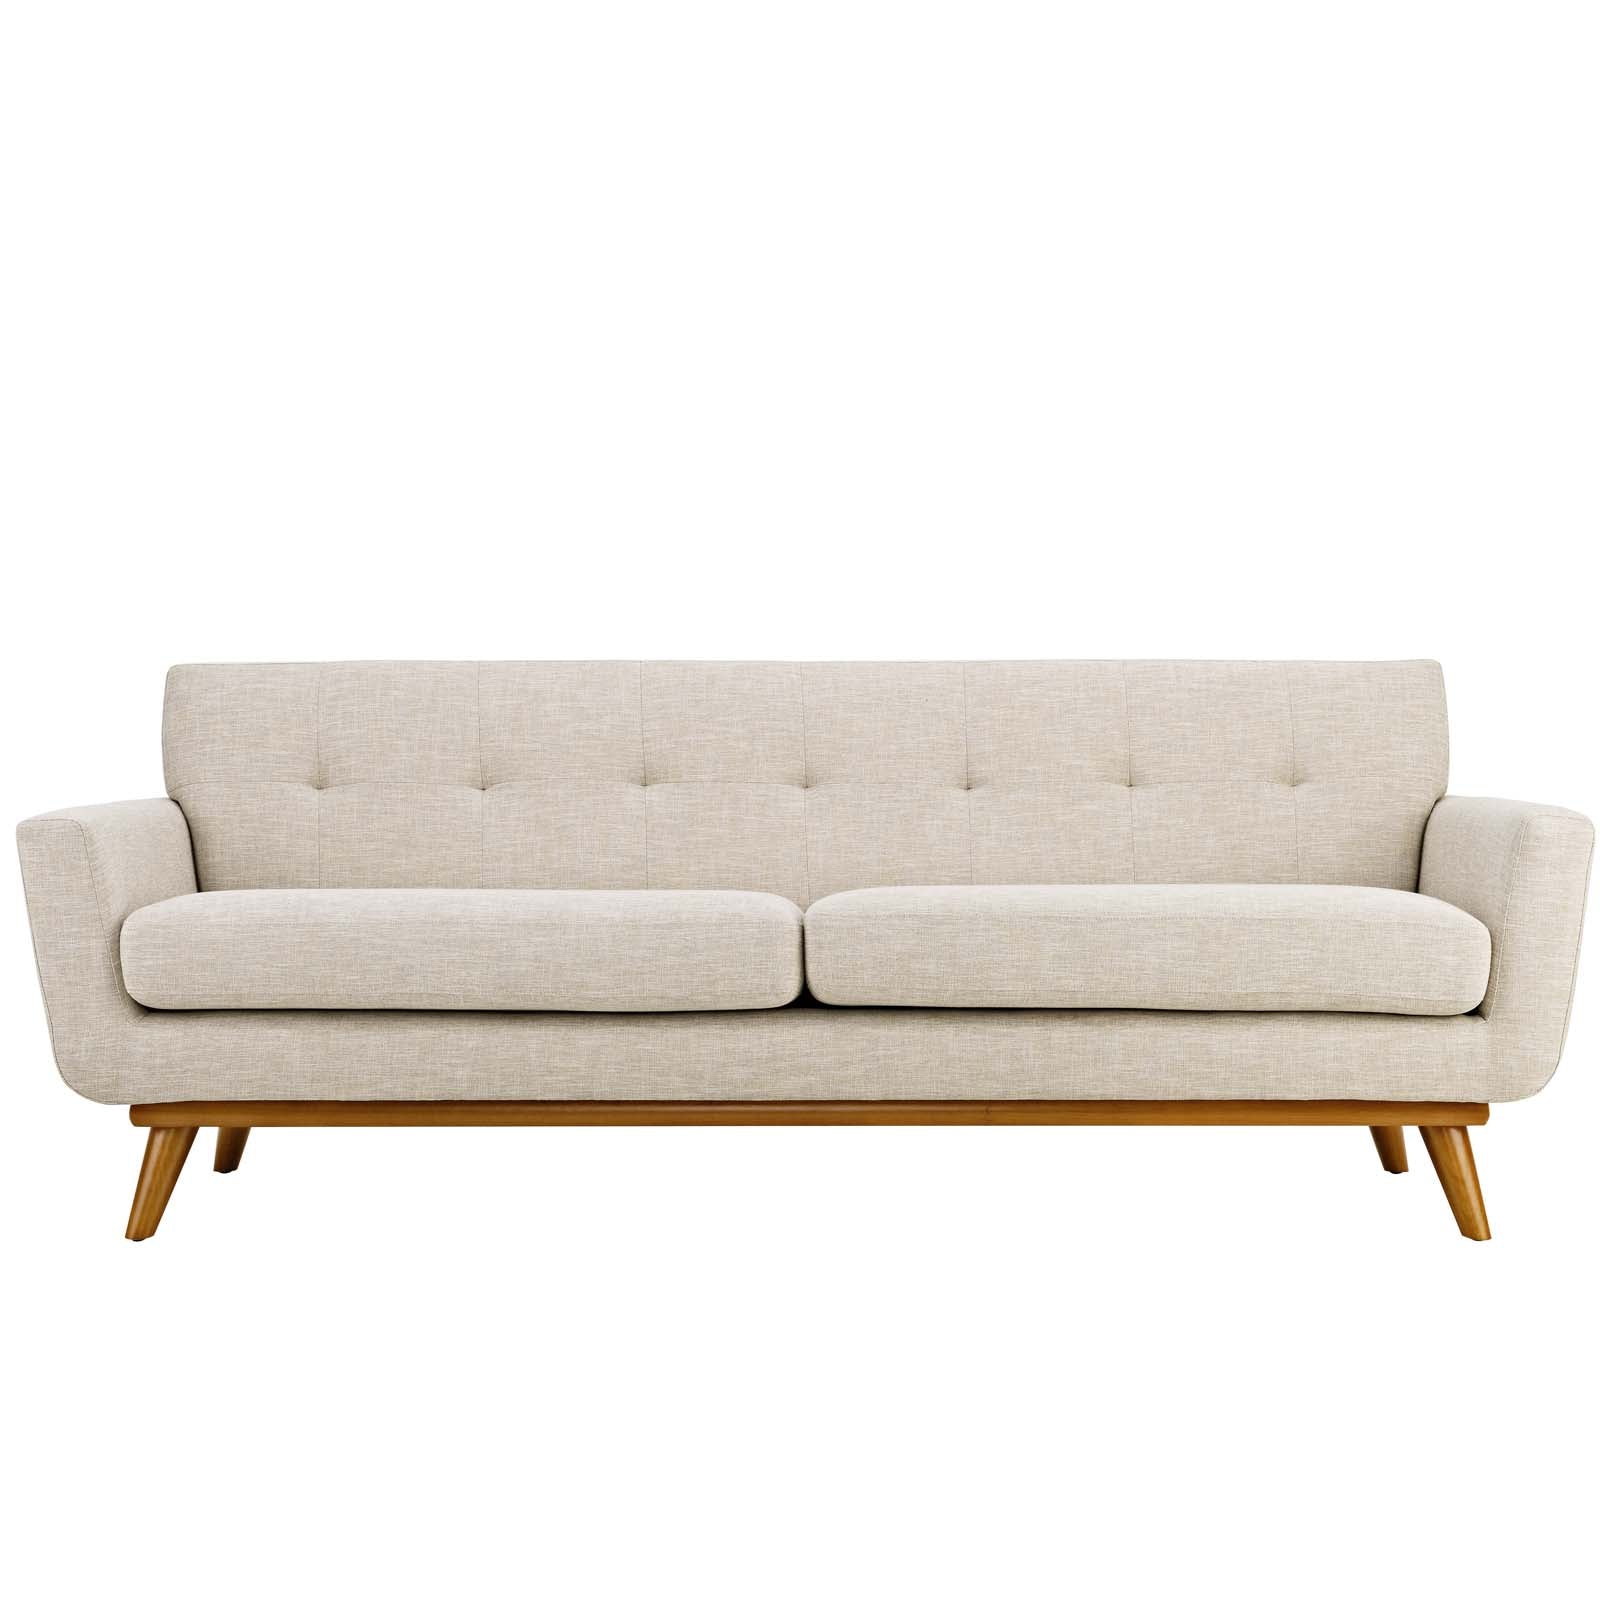 Modway Sofas & Couches - Engage Upholstered Fabric Sofa Beige